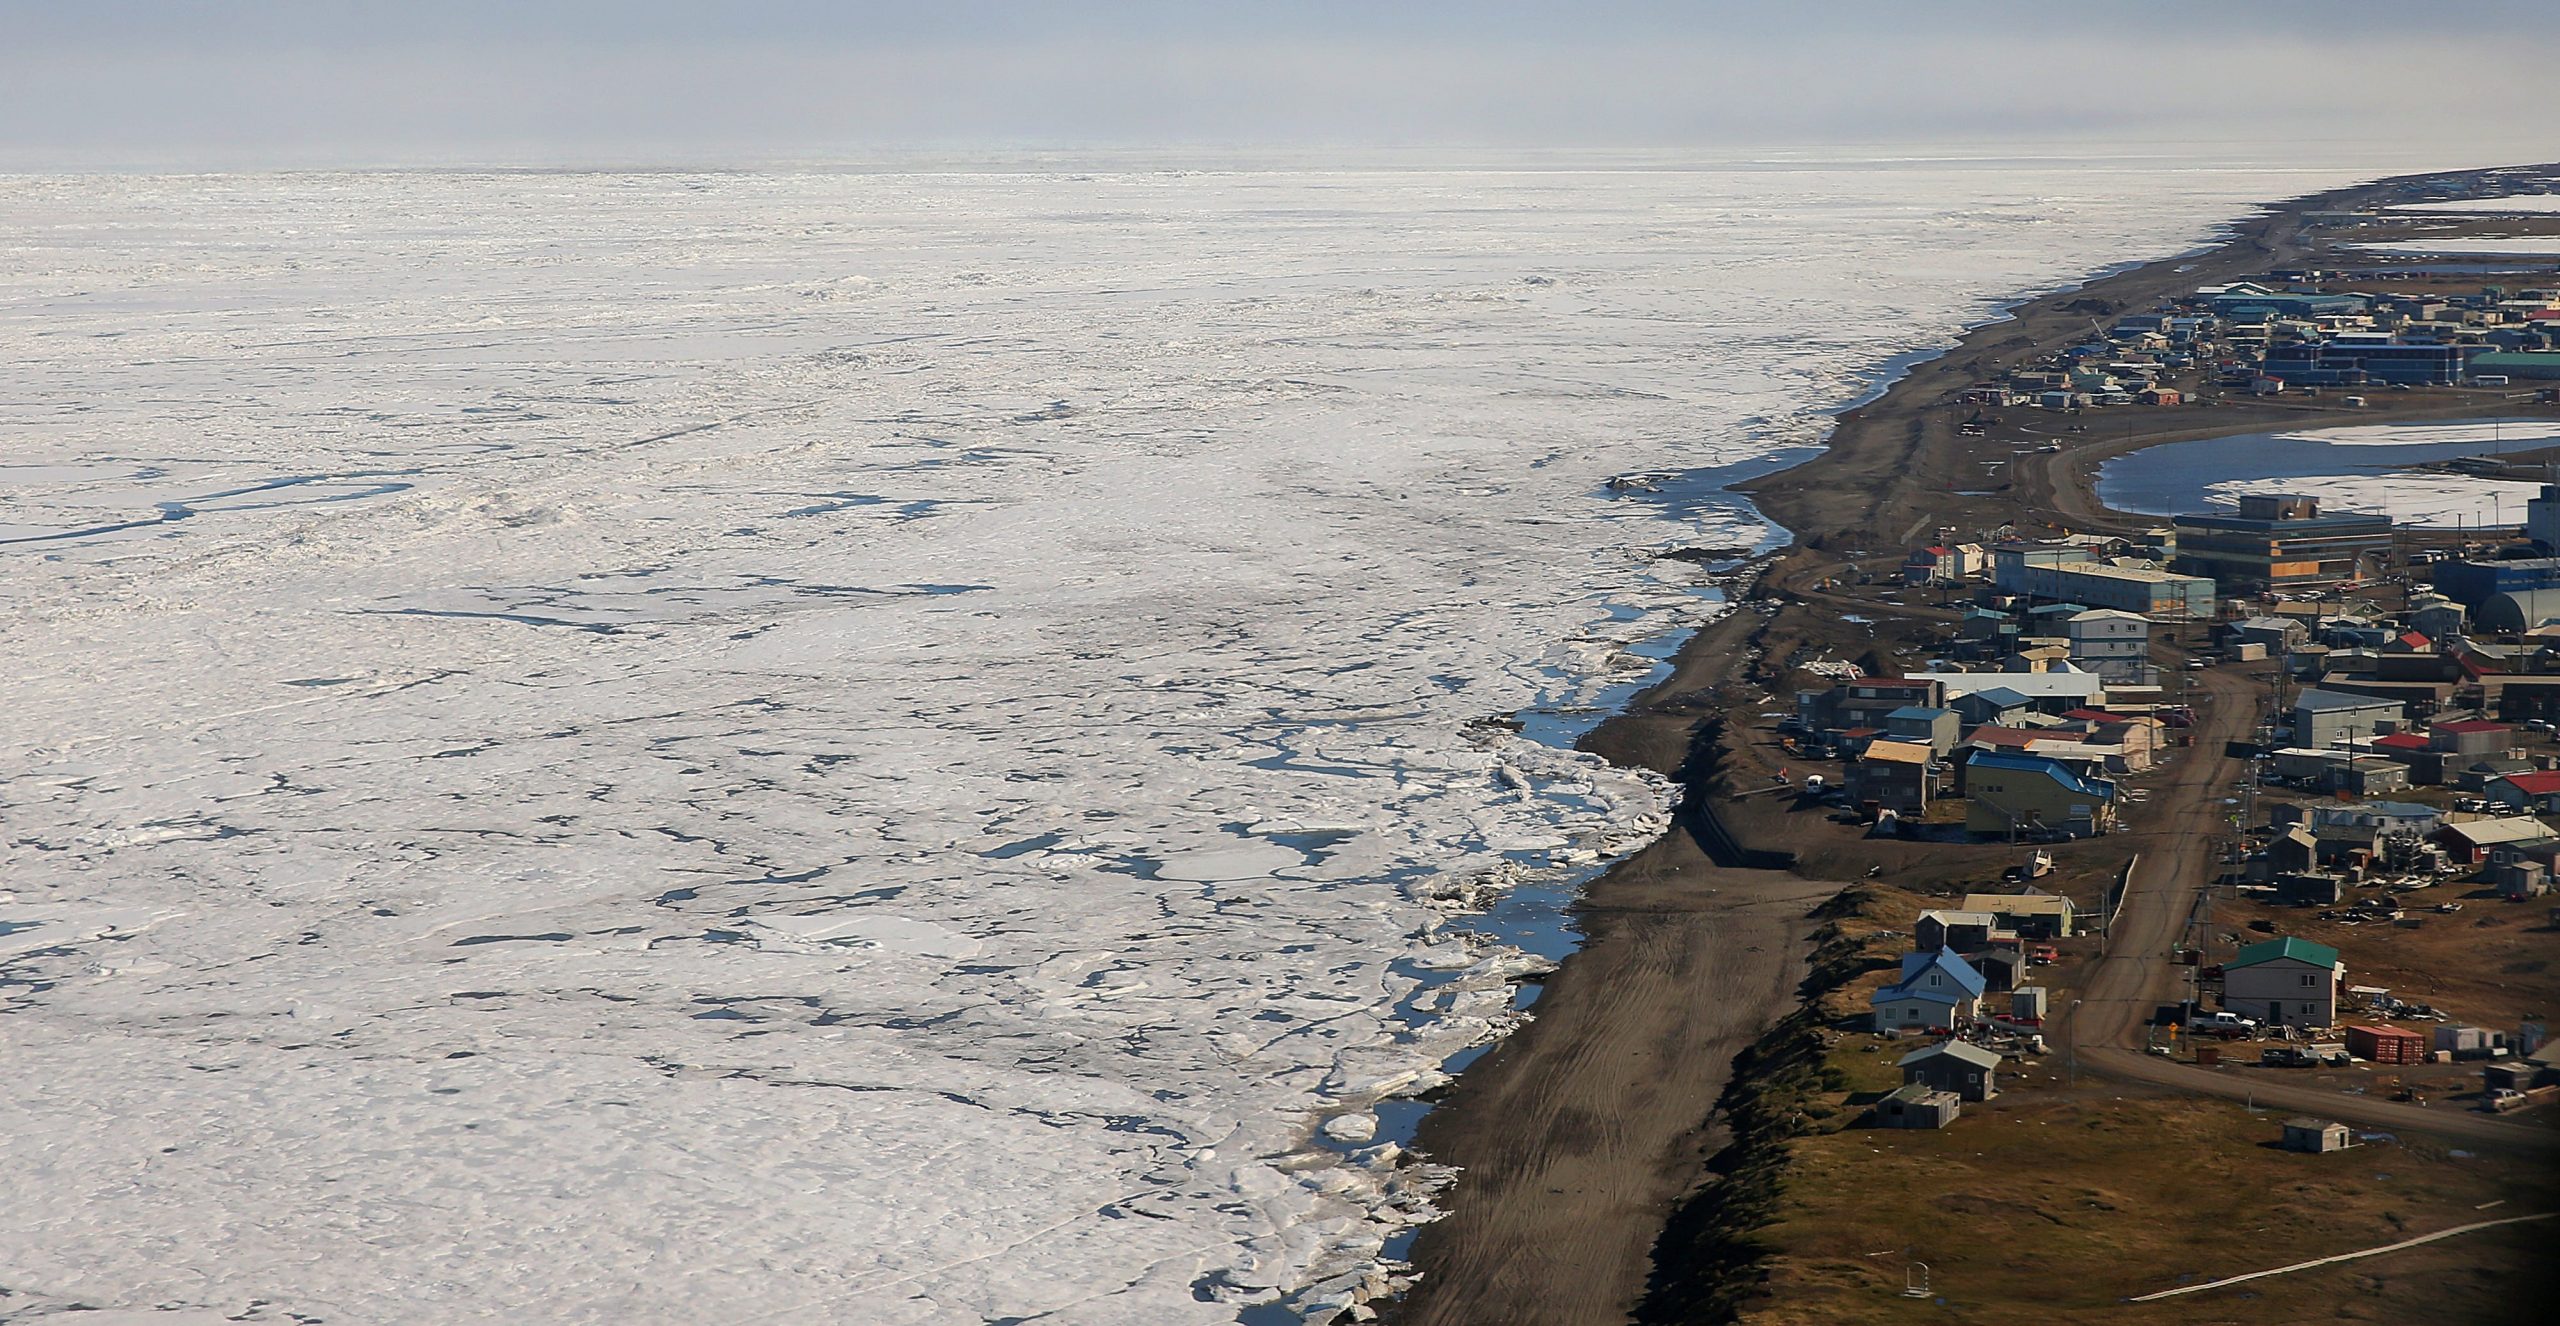 An aerial view of the arctic ice from above Barrow, Alaska. Officials have sought to protect Barrow, which is fewer than 15 feet above sea level, by moving municipal buildings and lining the coast with berms and sandbags.